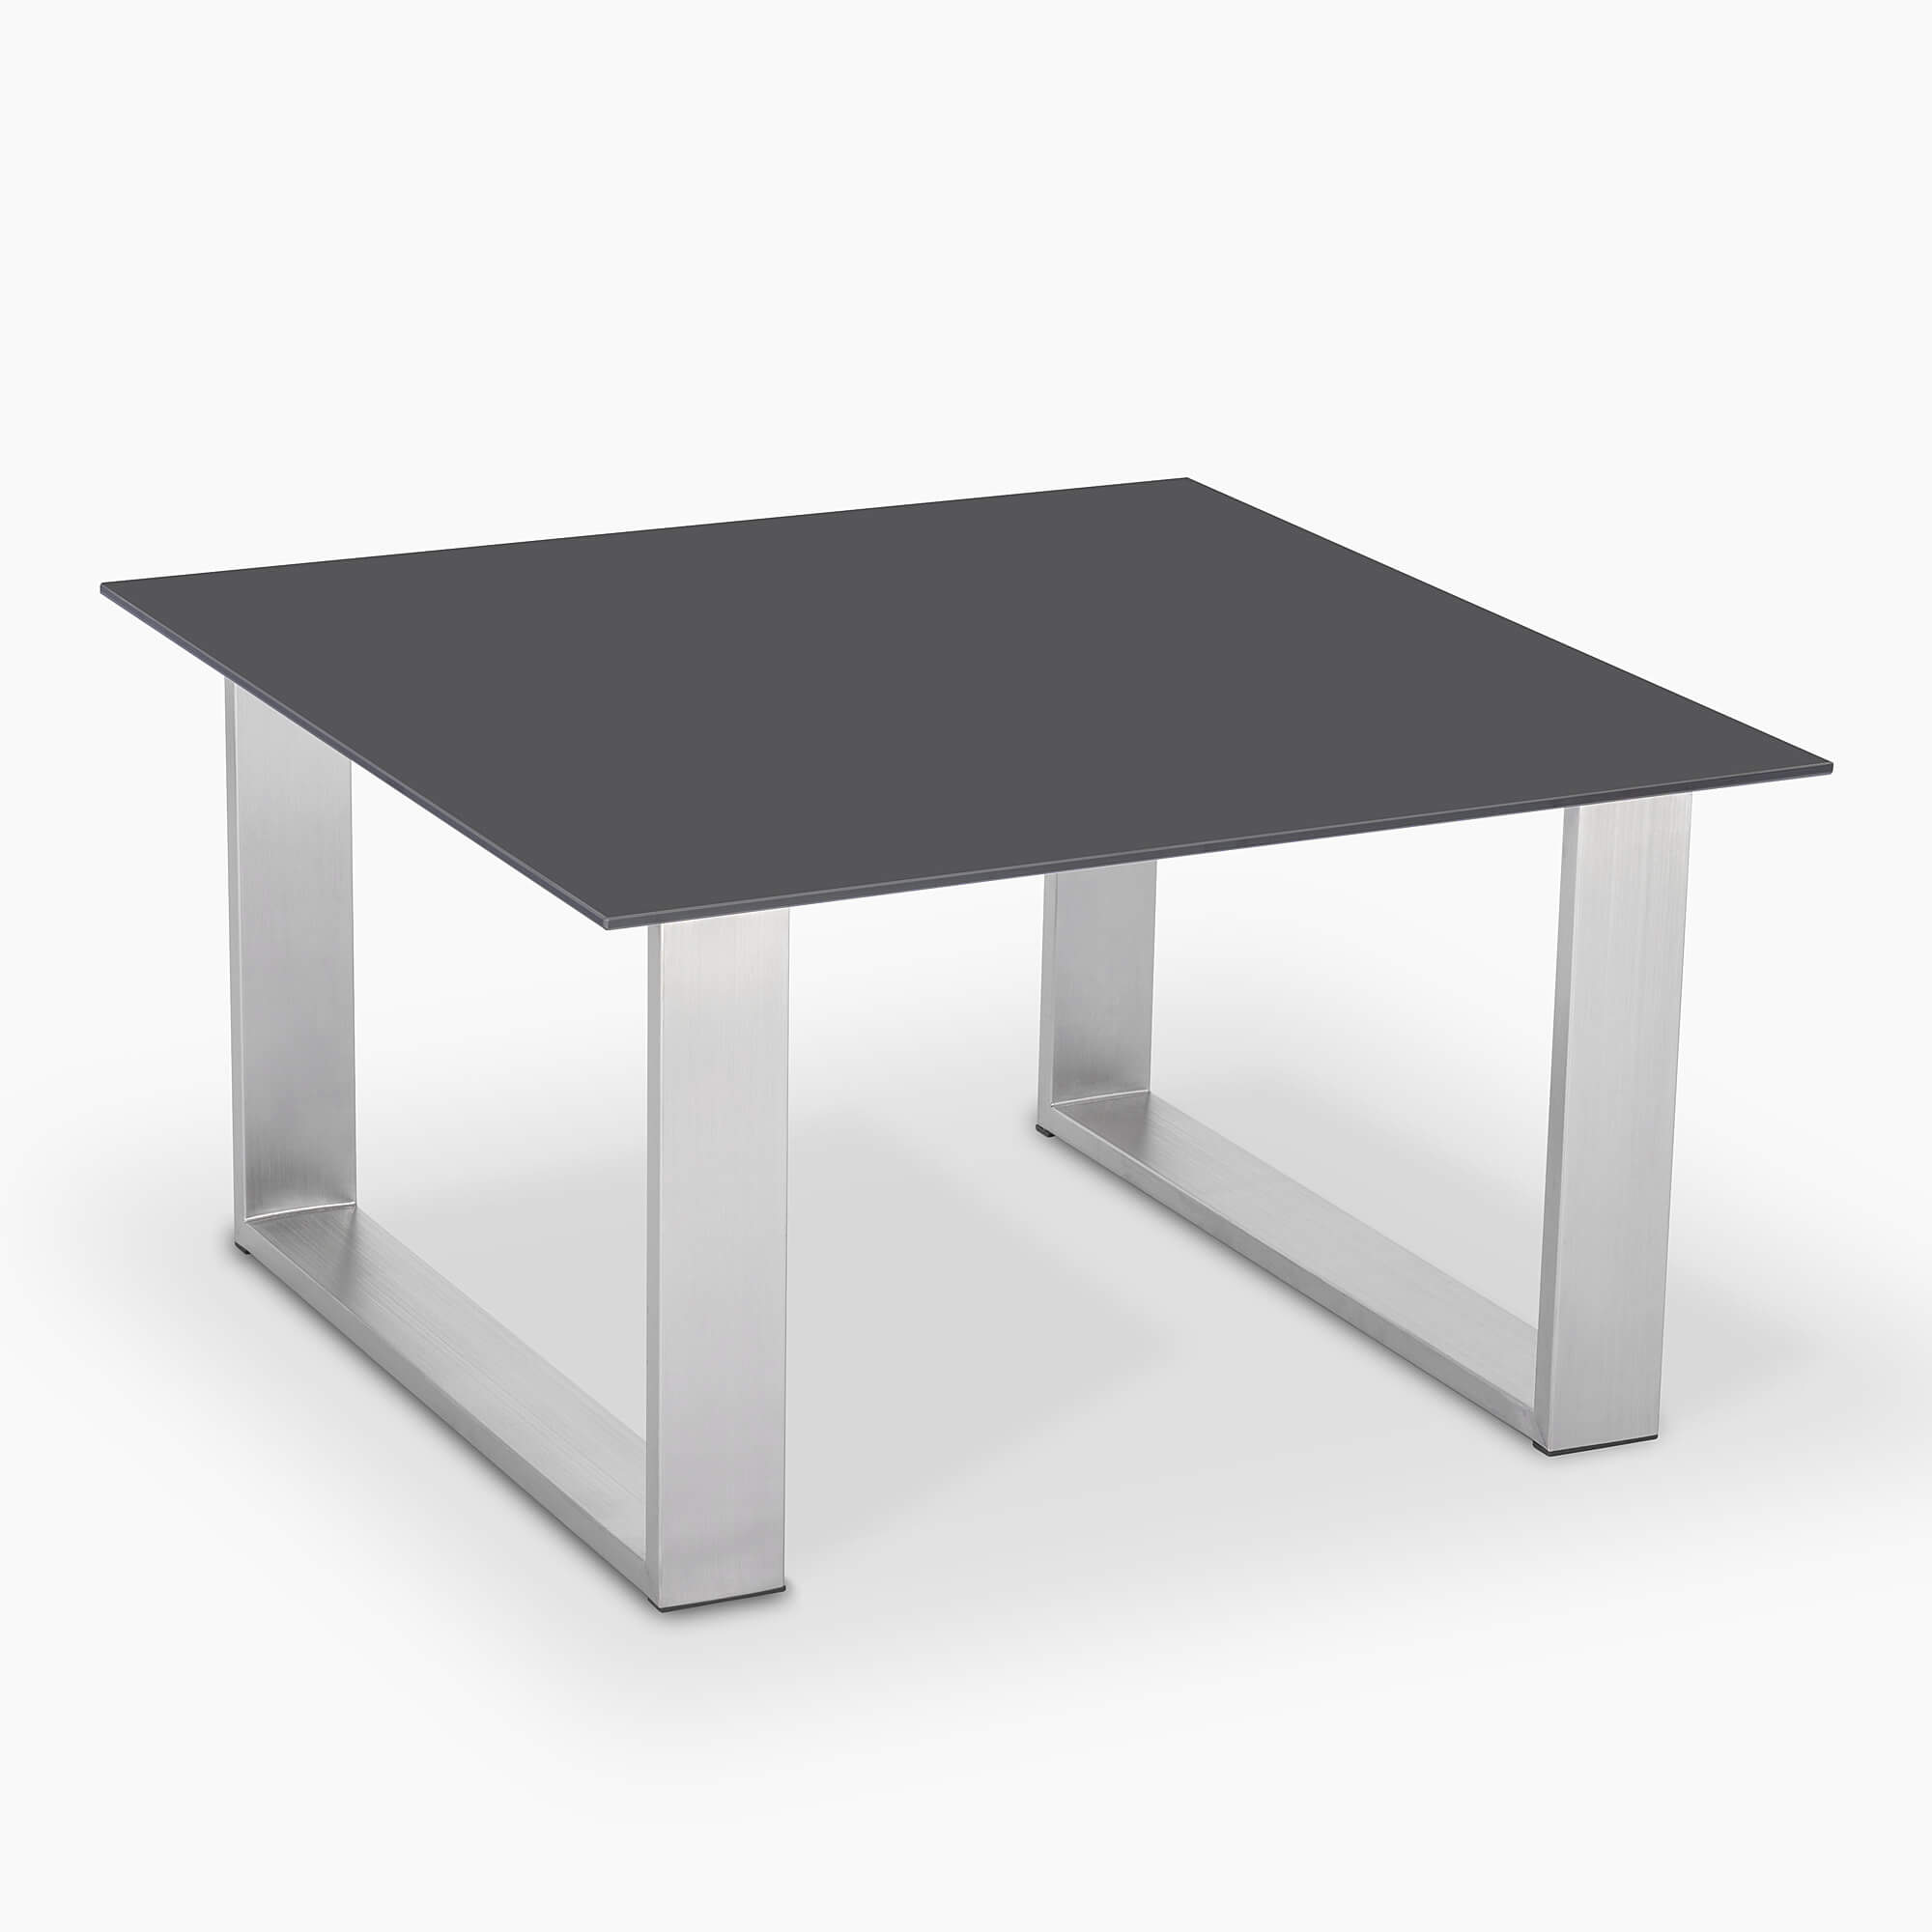 Anthracite-living-room-table-FleatLine-with-stainless-steel-skids